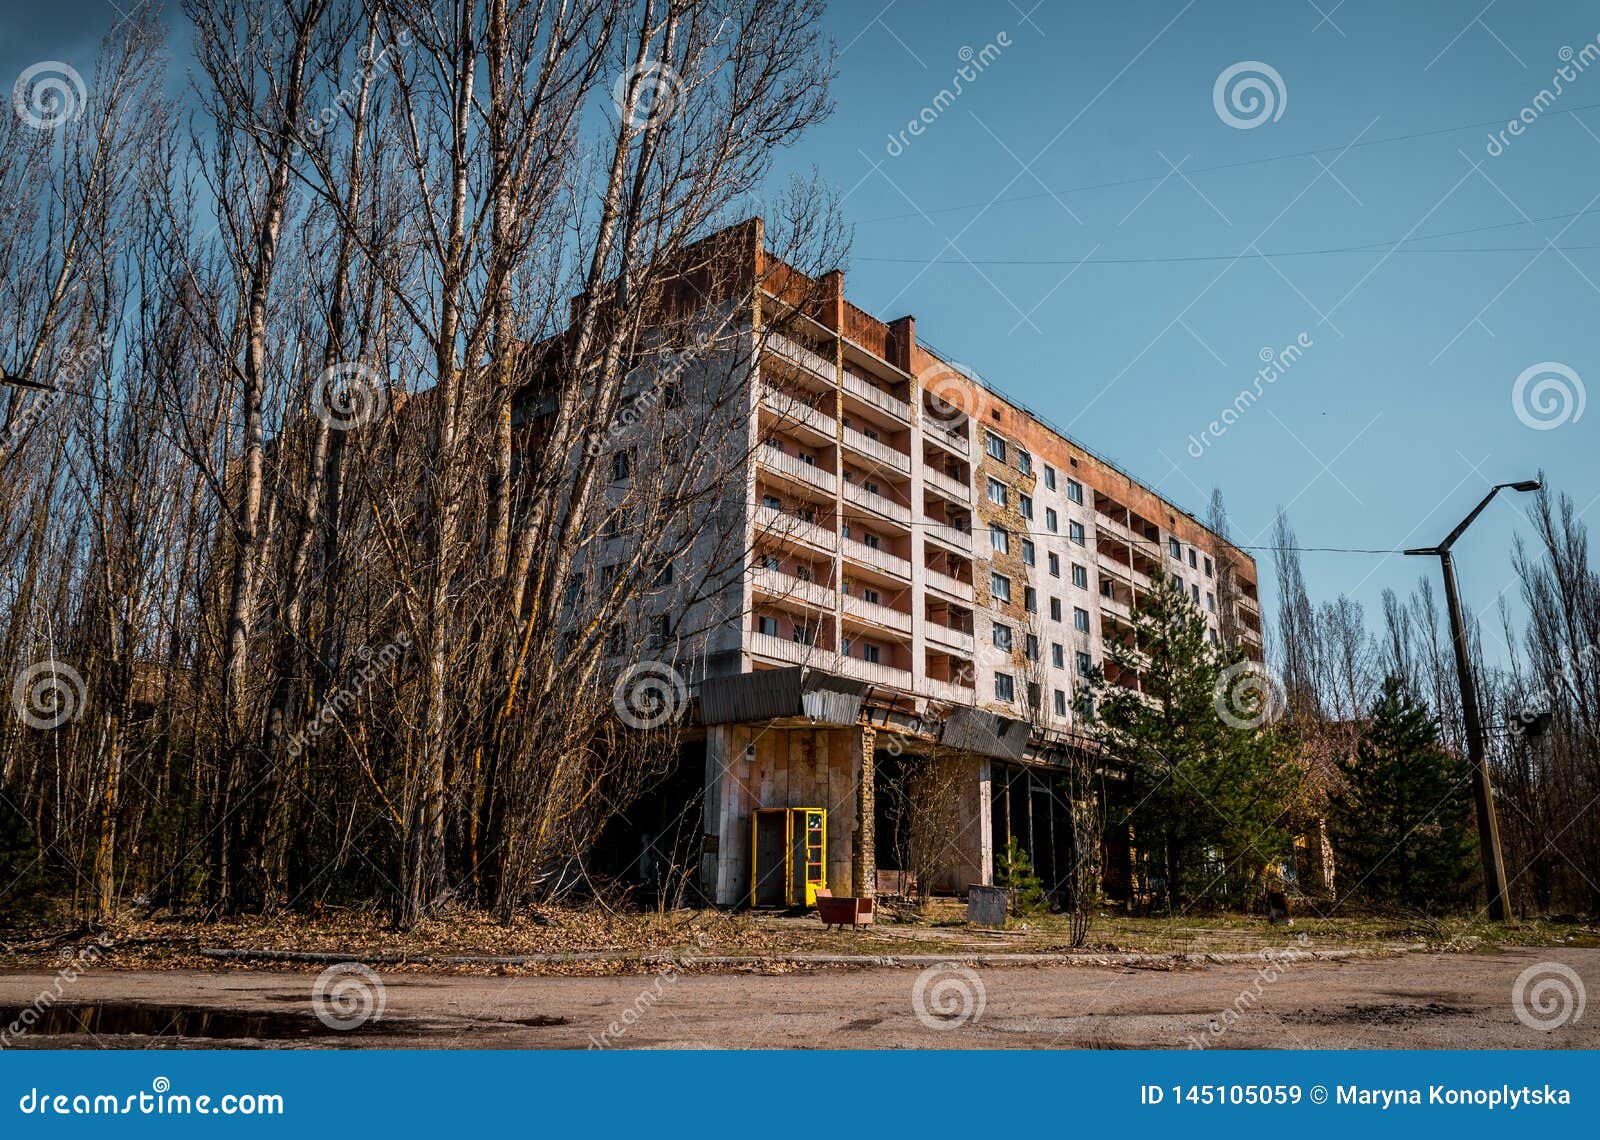 Old Abandoned House In The Ghost Town Of Pripyat Ukraine Consequences Of A Nuclear Explosion At The Chernobyl Nuclear Power Plan Stock Image Image Of House Explosion 145105059